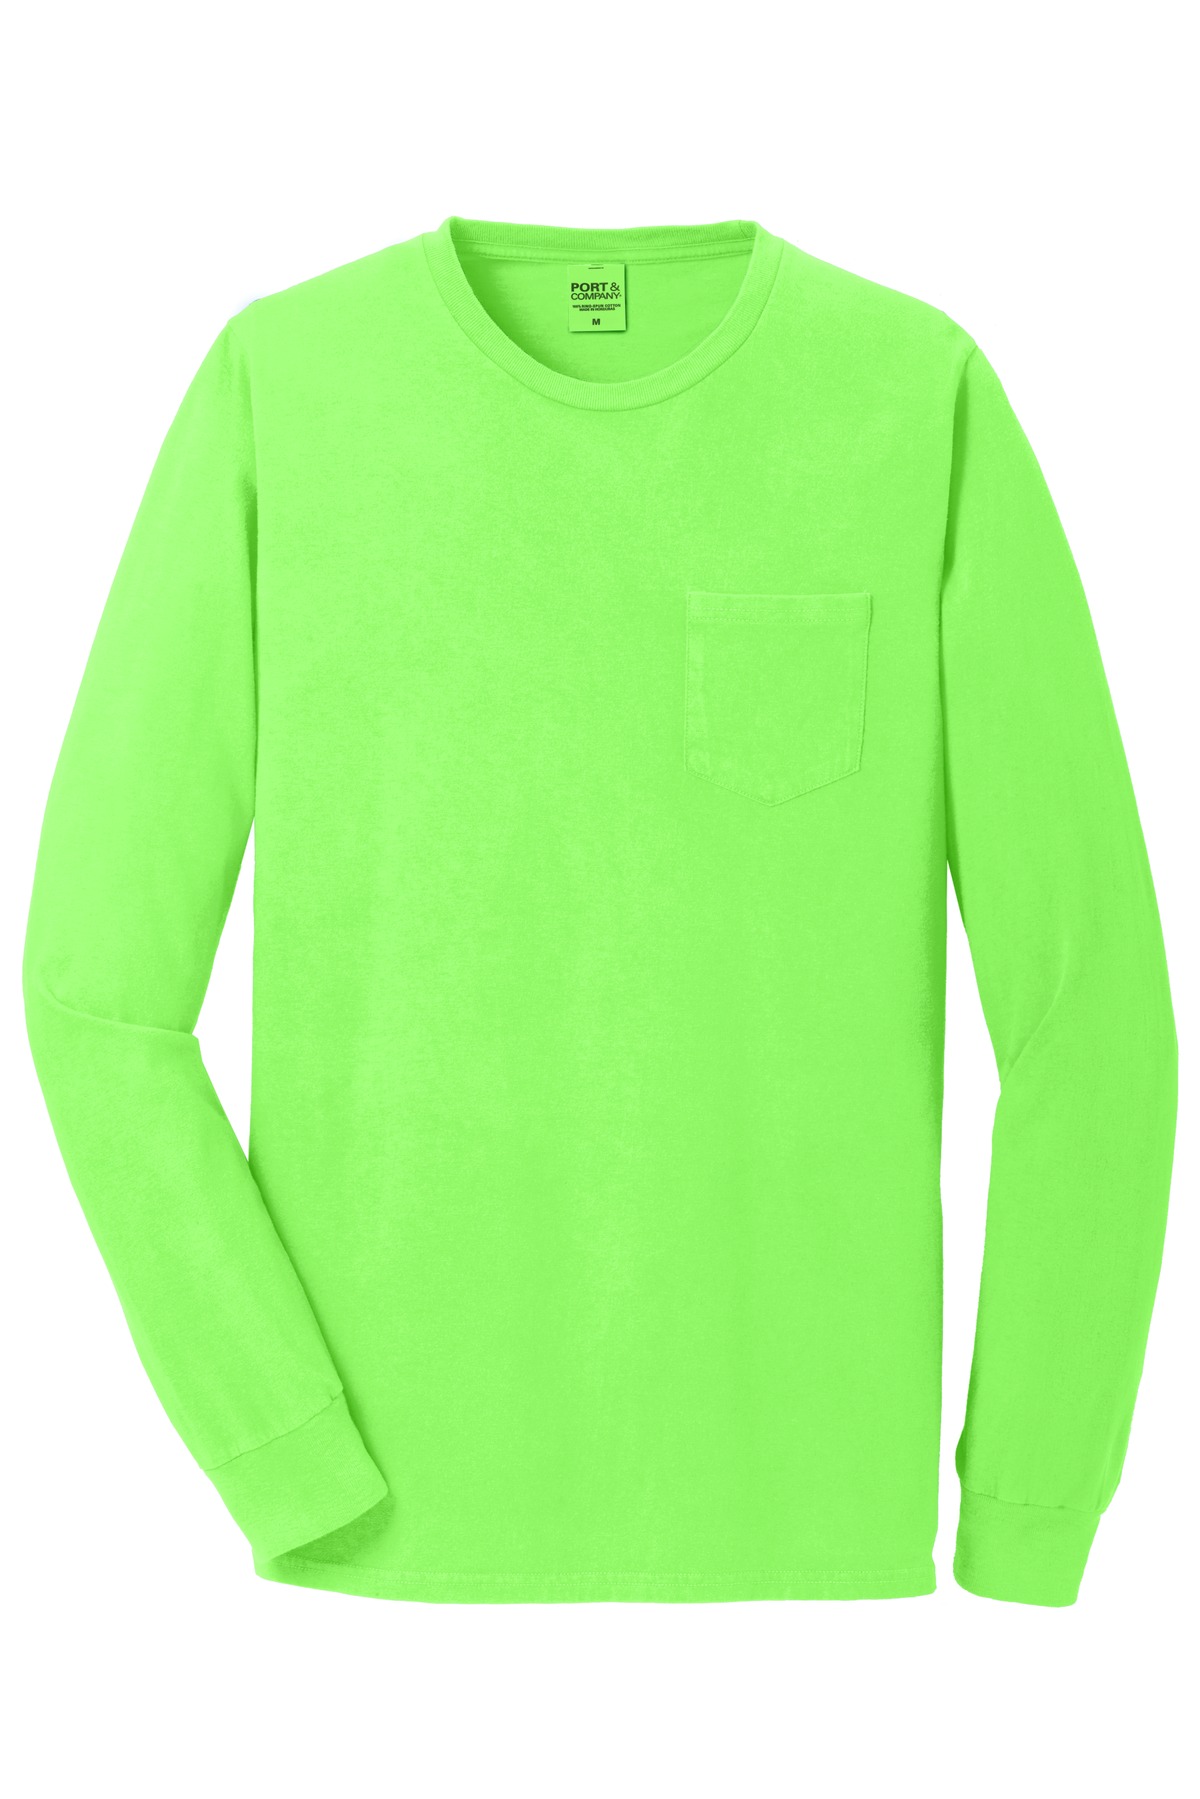 Port & Company Pigment Dyed Long Sleeve Pocket Tee-M (Neon Green) - image 5 of 6